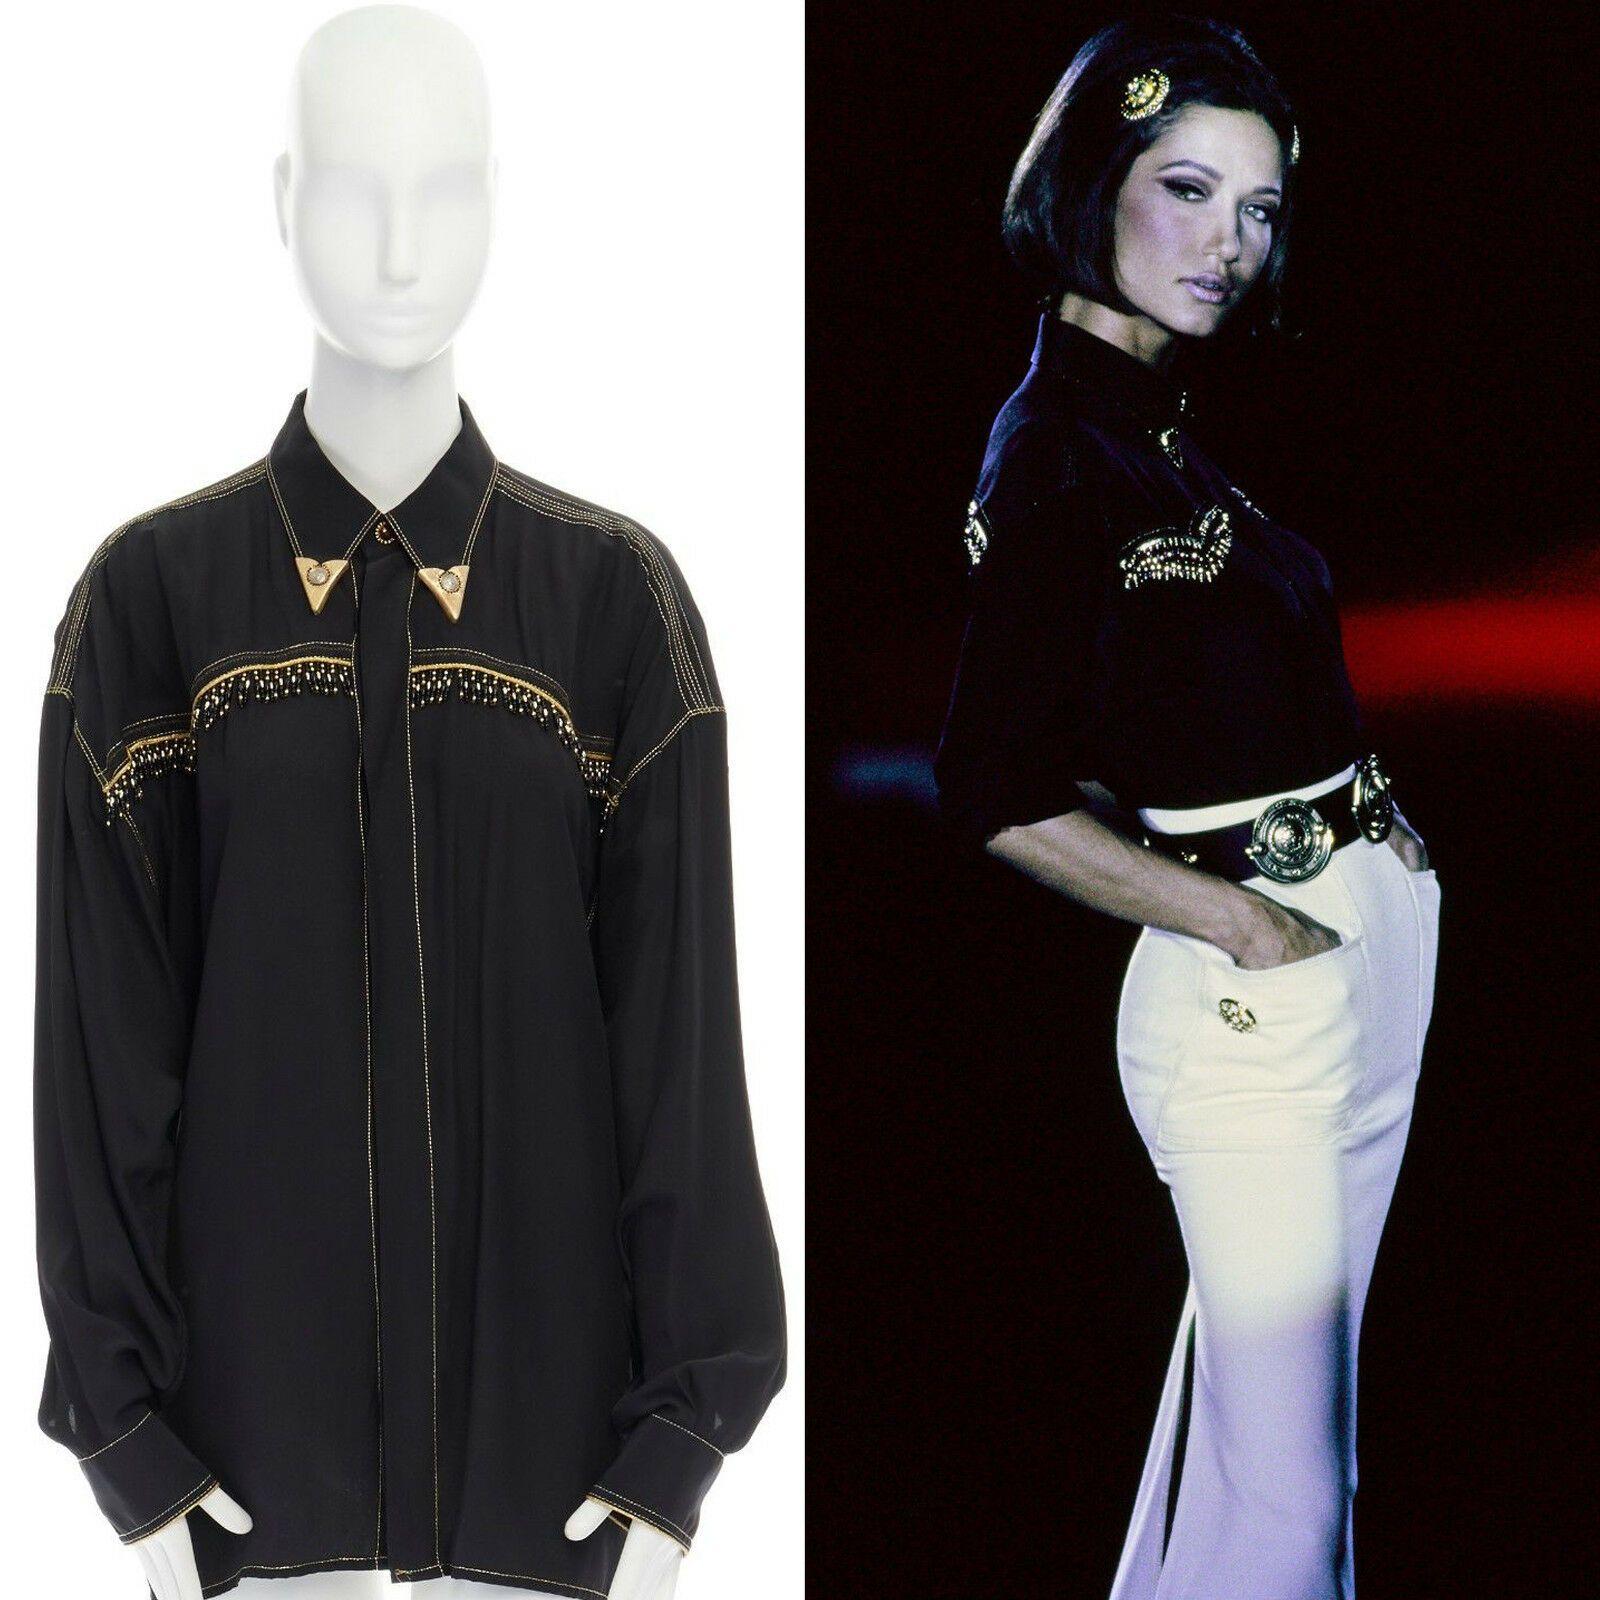 runway VERSACE AW92 black fringe beaded gold metal collar oversized shirt top
GIANNI VERSACE
FROM THE FALL WINTER 1992 'MISS S&M' COLLECTION
RE-EDITIONED AND WORN BY DONATELLA VERSACE in SPRING SUMMER 2018 COLLECTION
Rayon, silk, viscose. Black with